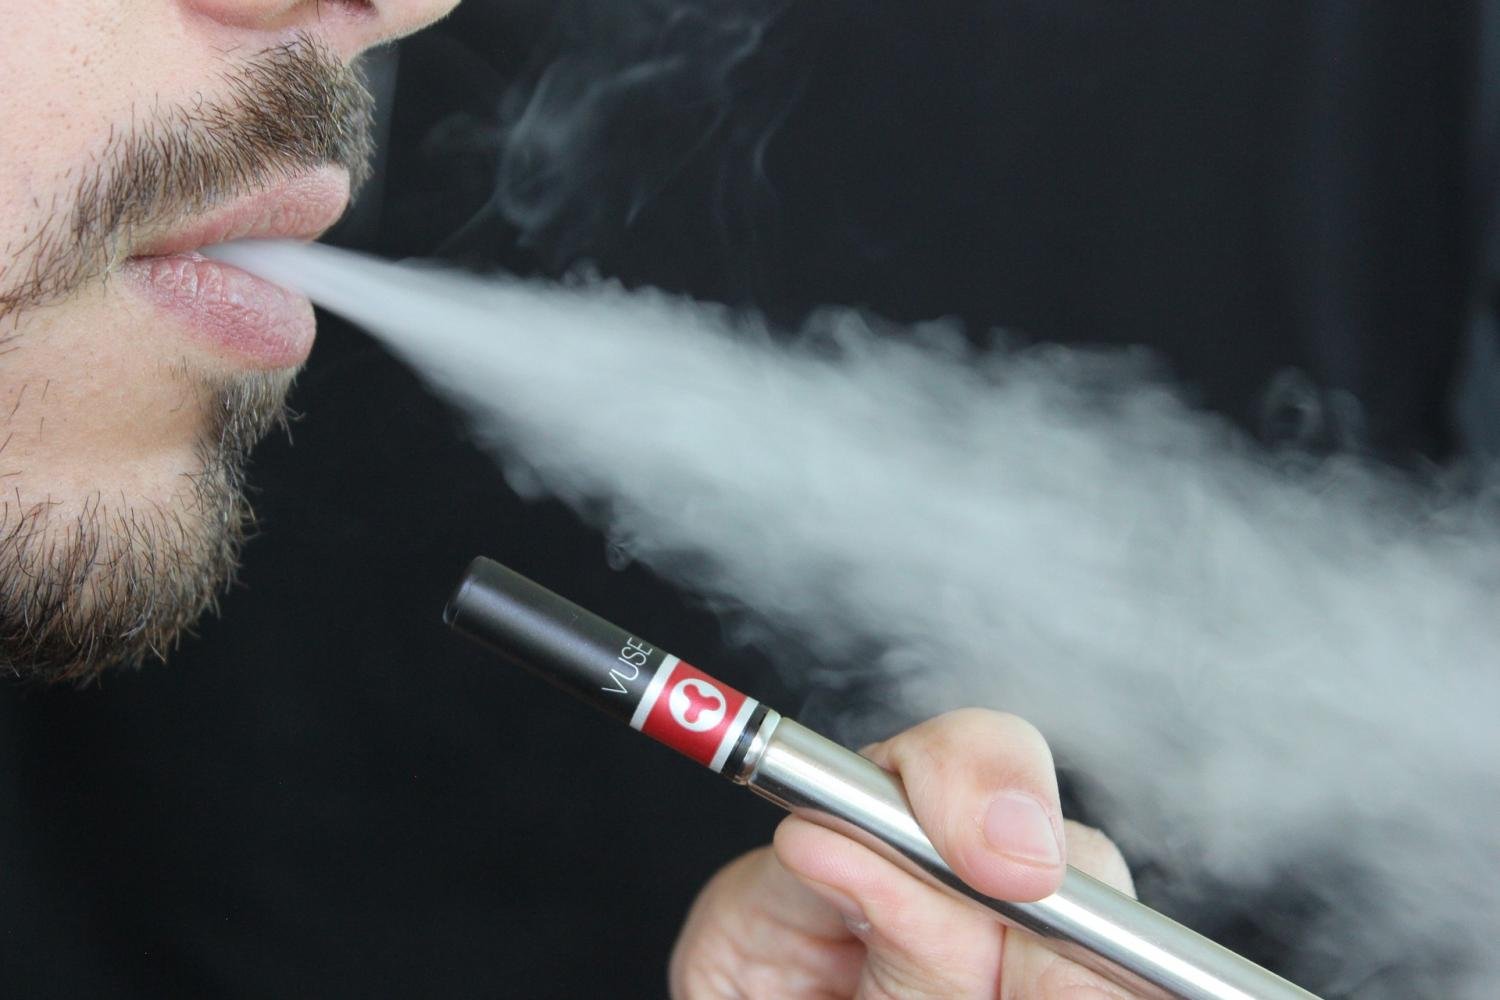 Study finds e-cigarette users now more likely to quit traditional cigarettes